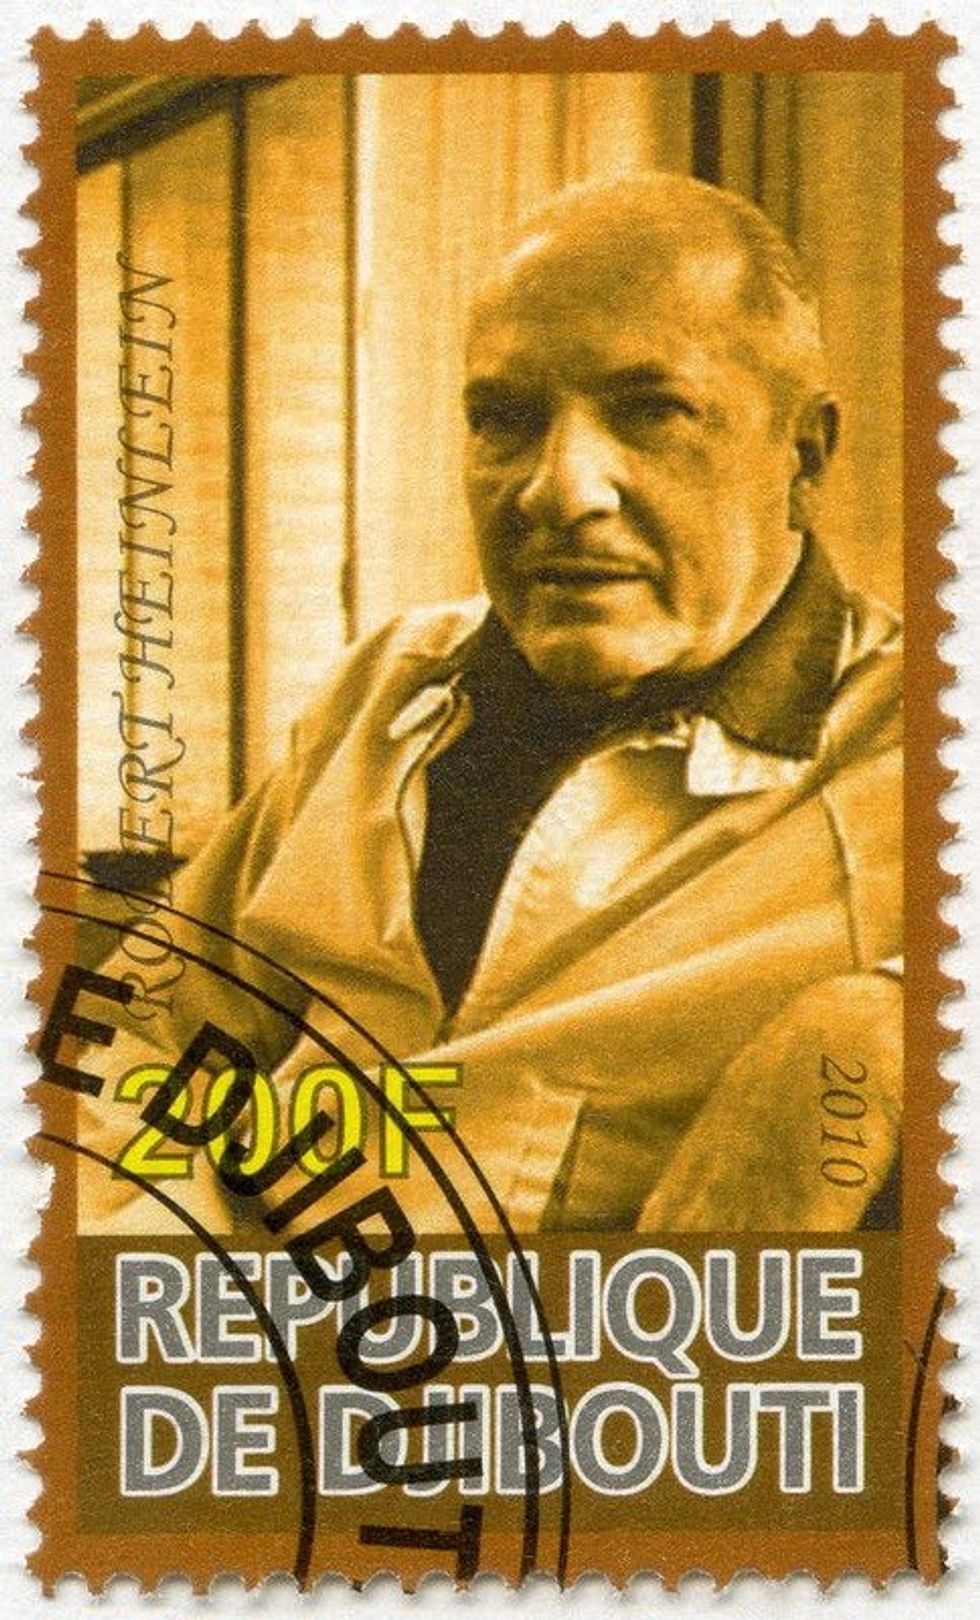 A stamp printed in Republic of Djibouti shows Robert Heinlein (1907-1988)